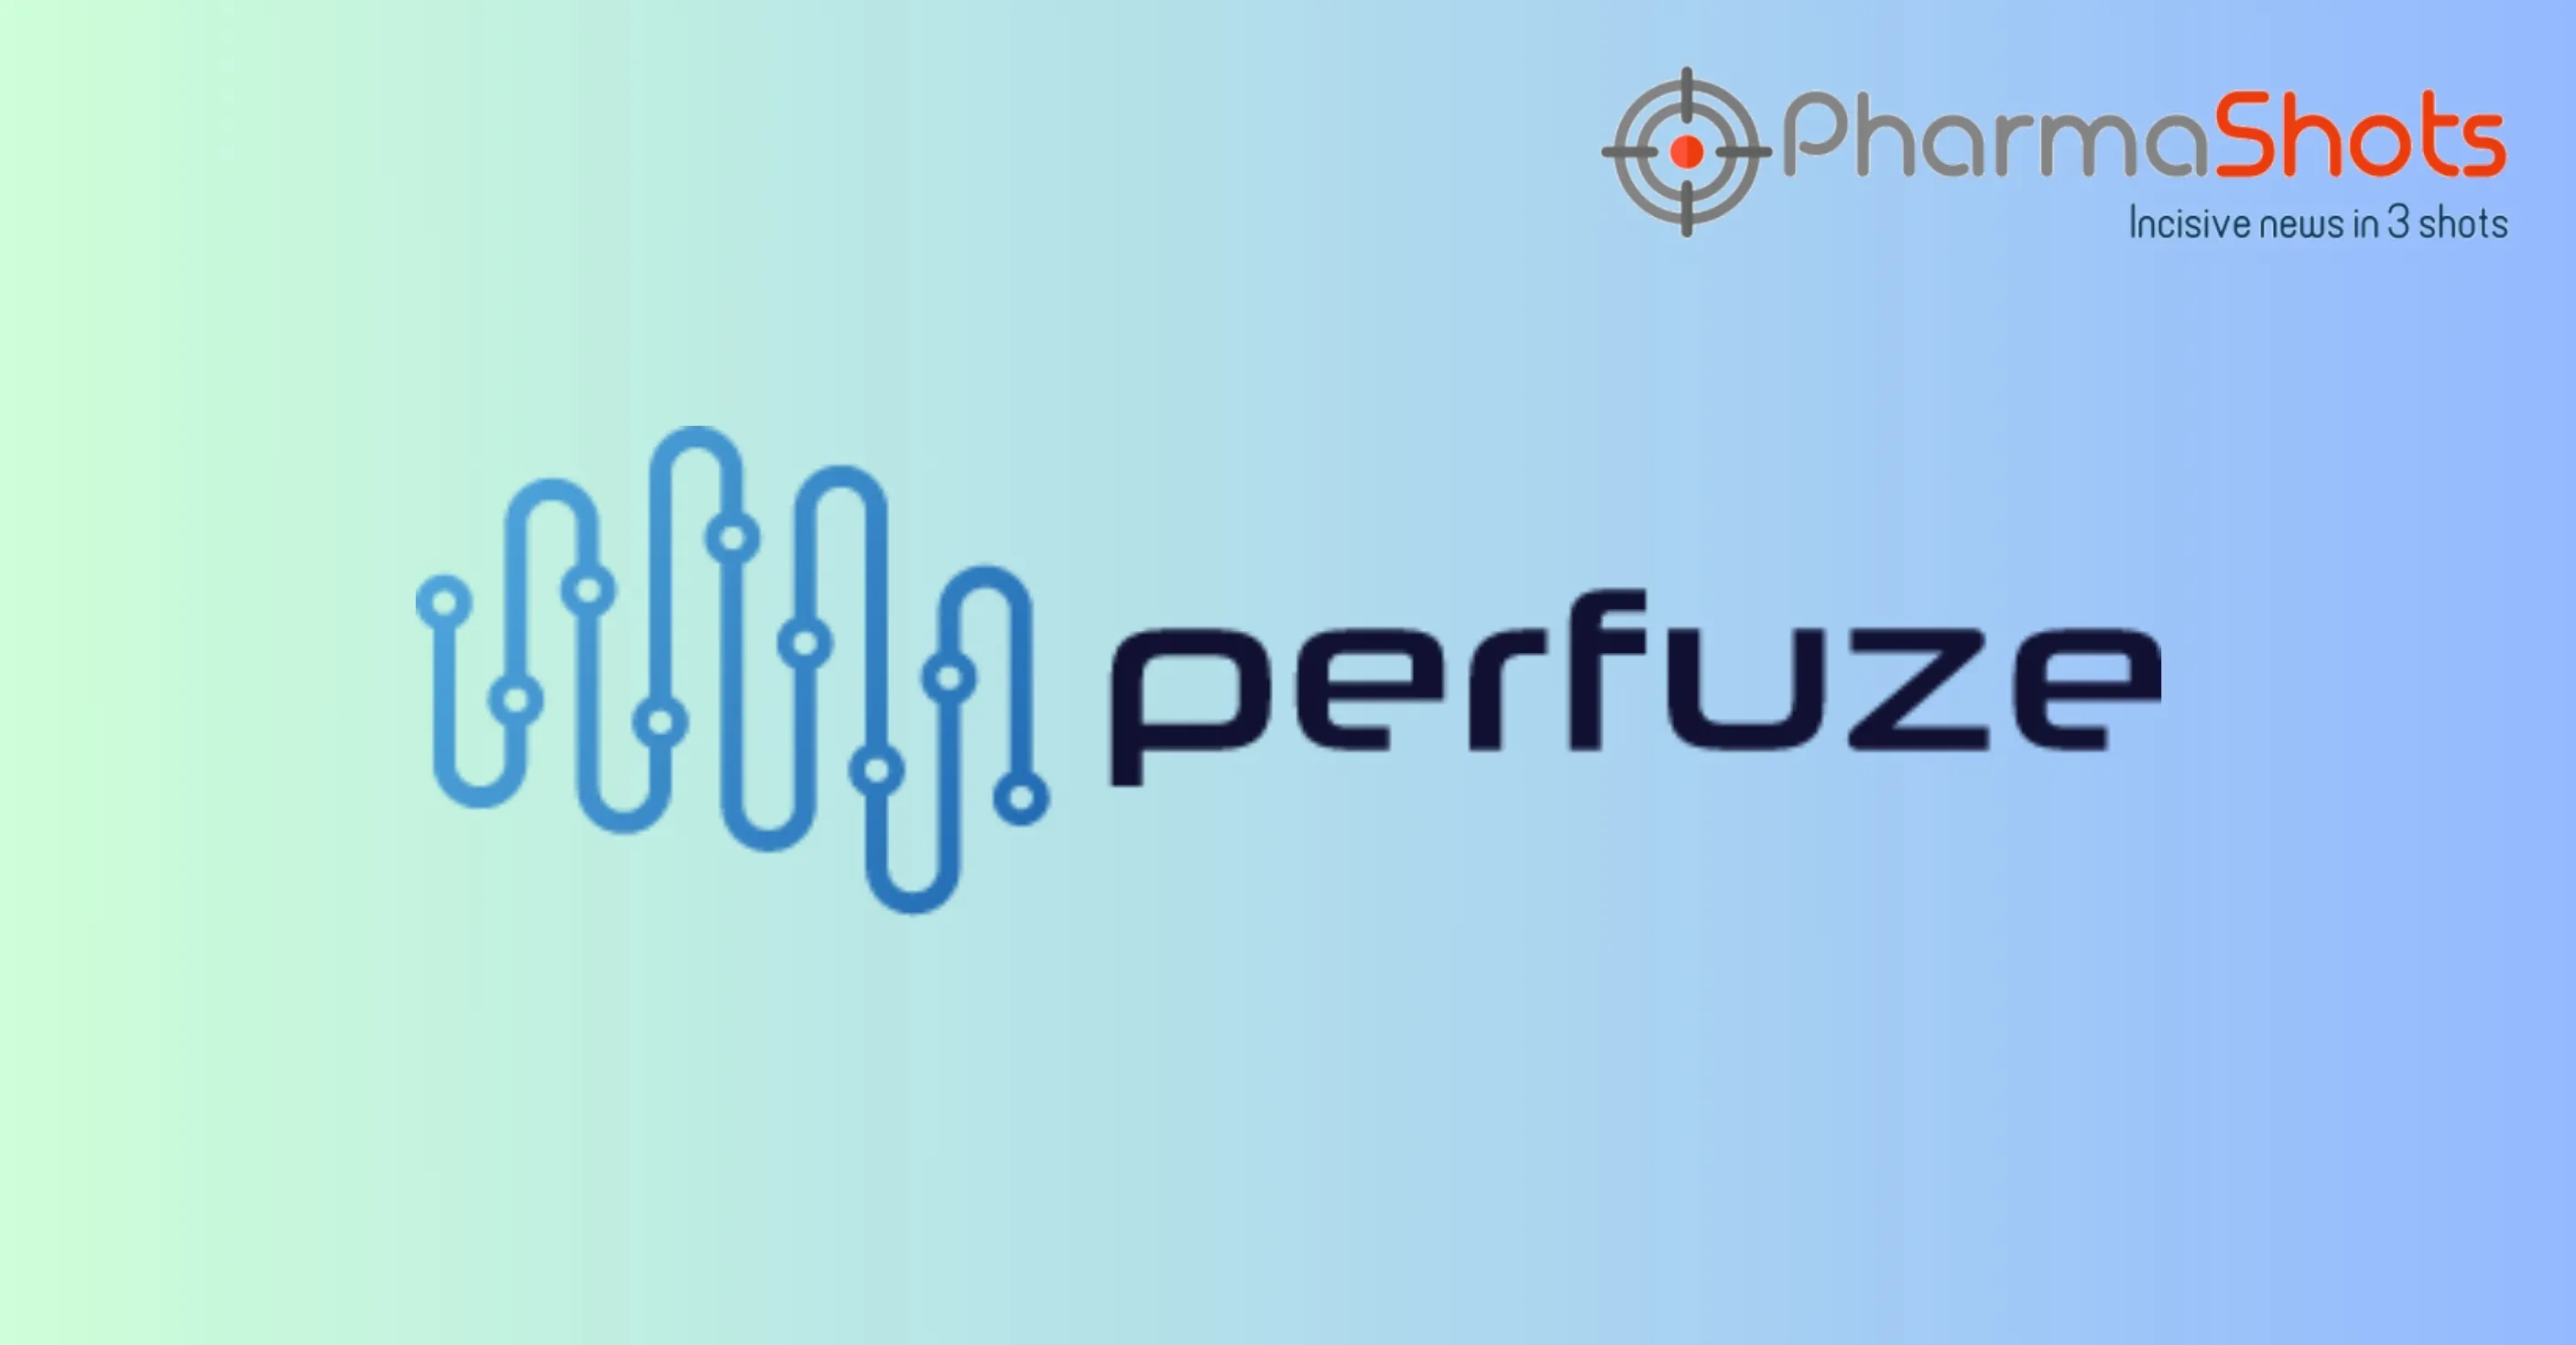 Perfuze Receives the US FDA’s 510(k) Clearance for Novel Neurovascular Aspiration and Access Catheters for the Treatment of Strokes